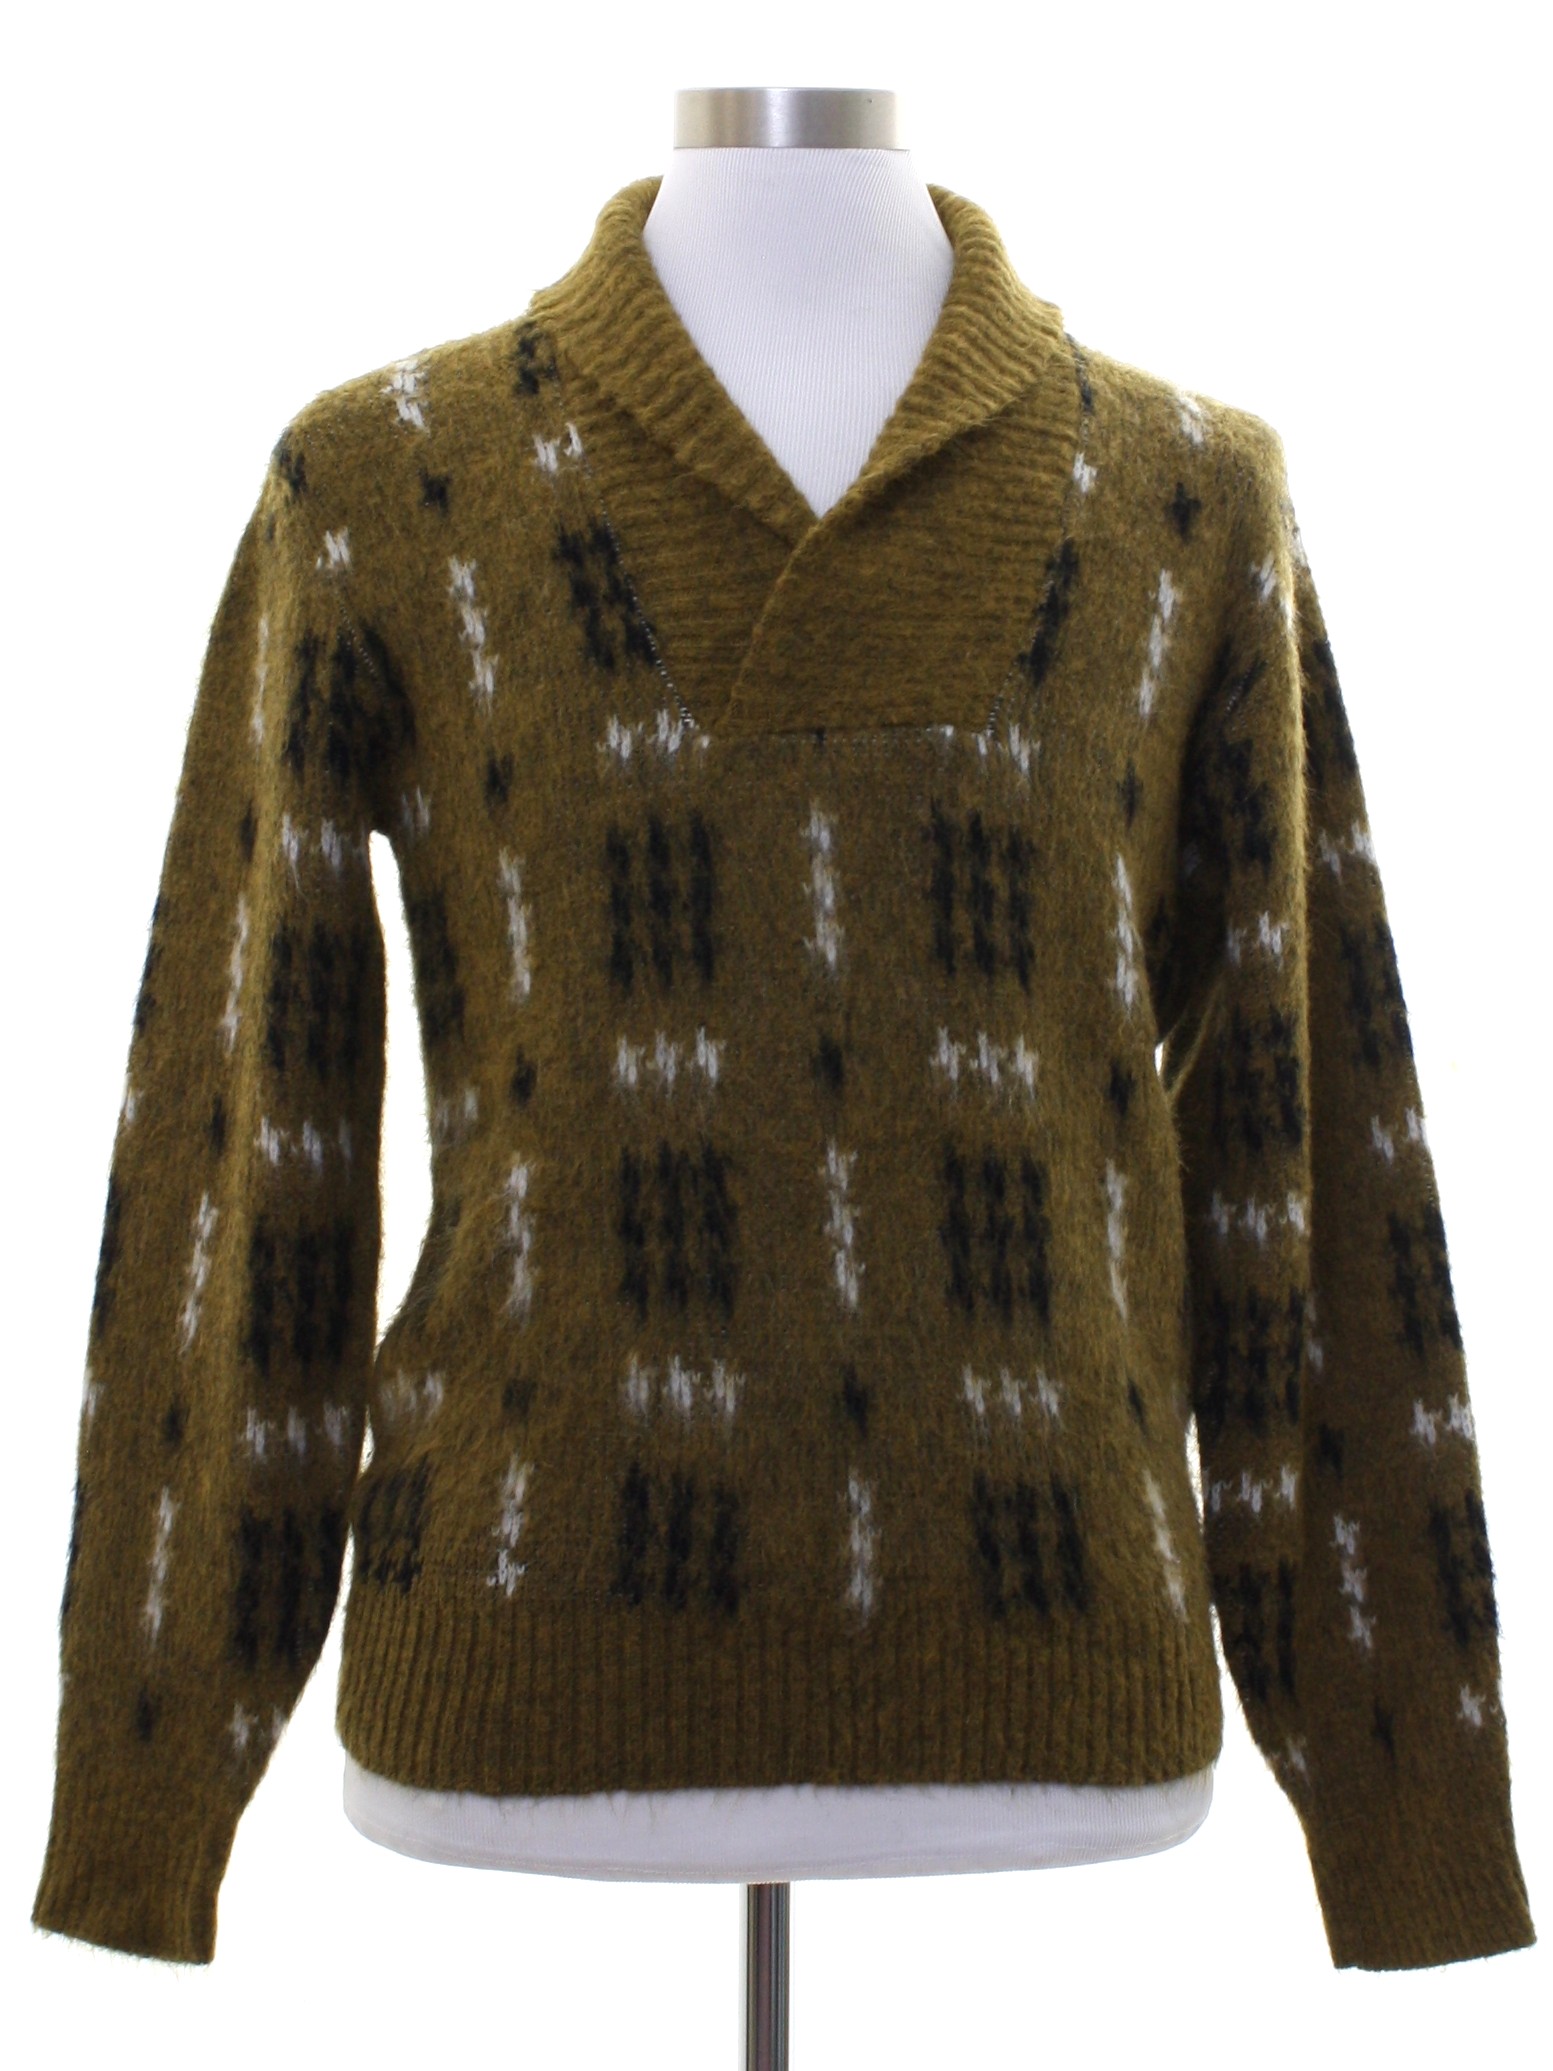 1950s The Pat Boone Sweater by Revere Sweater: Late 50s -The Pat Boone ...